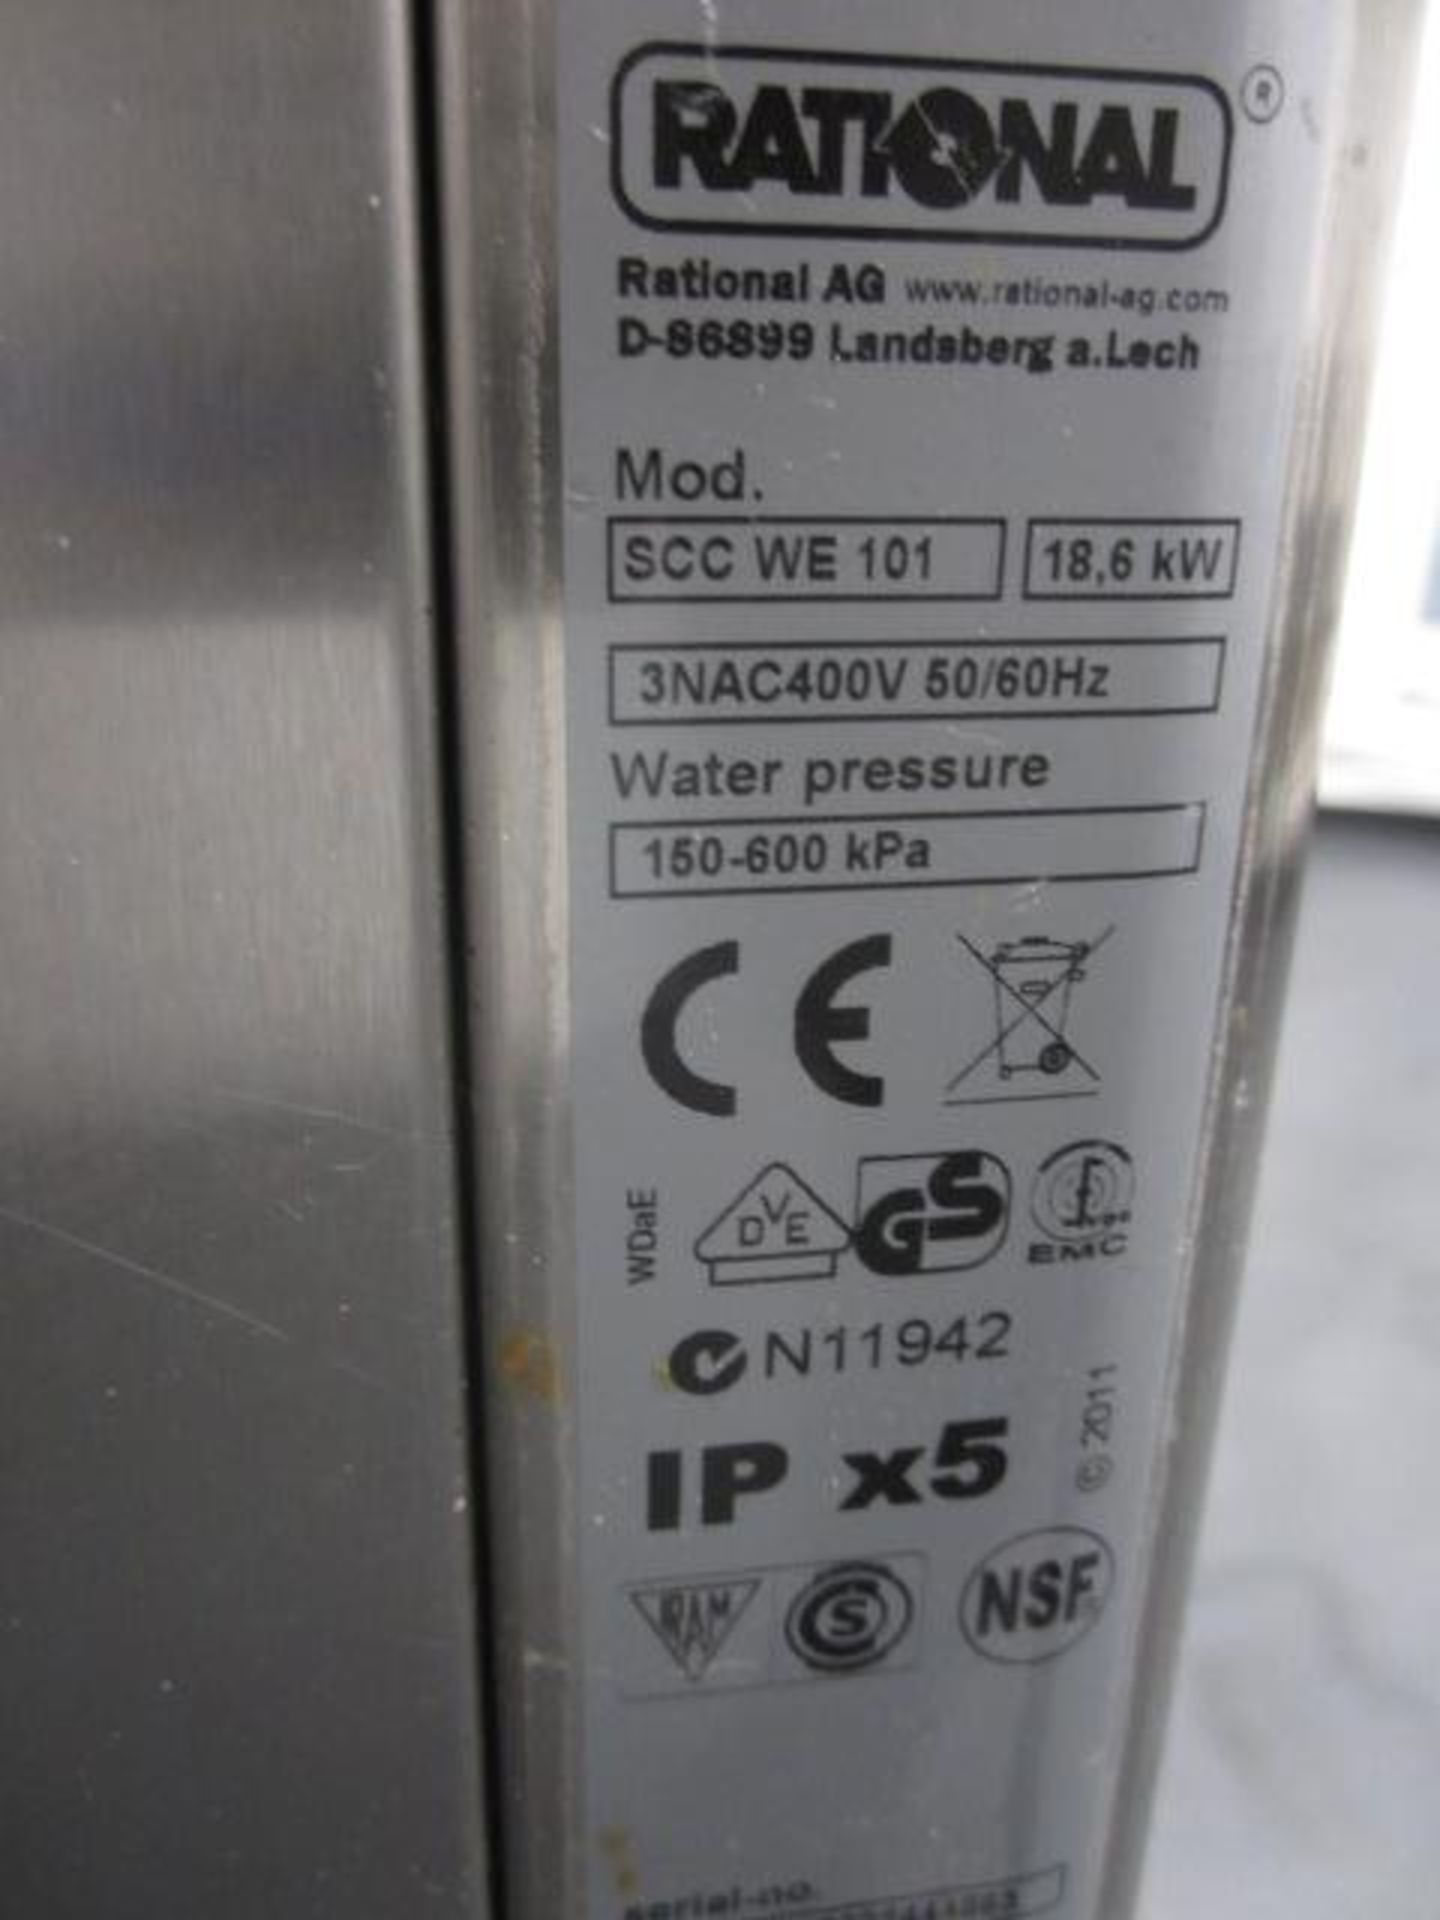 Rational 01 5 Series self-cooking centre, model SCC WE101, s/n: E11SH15022444863, mounted on tray - Image 2 of 3